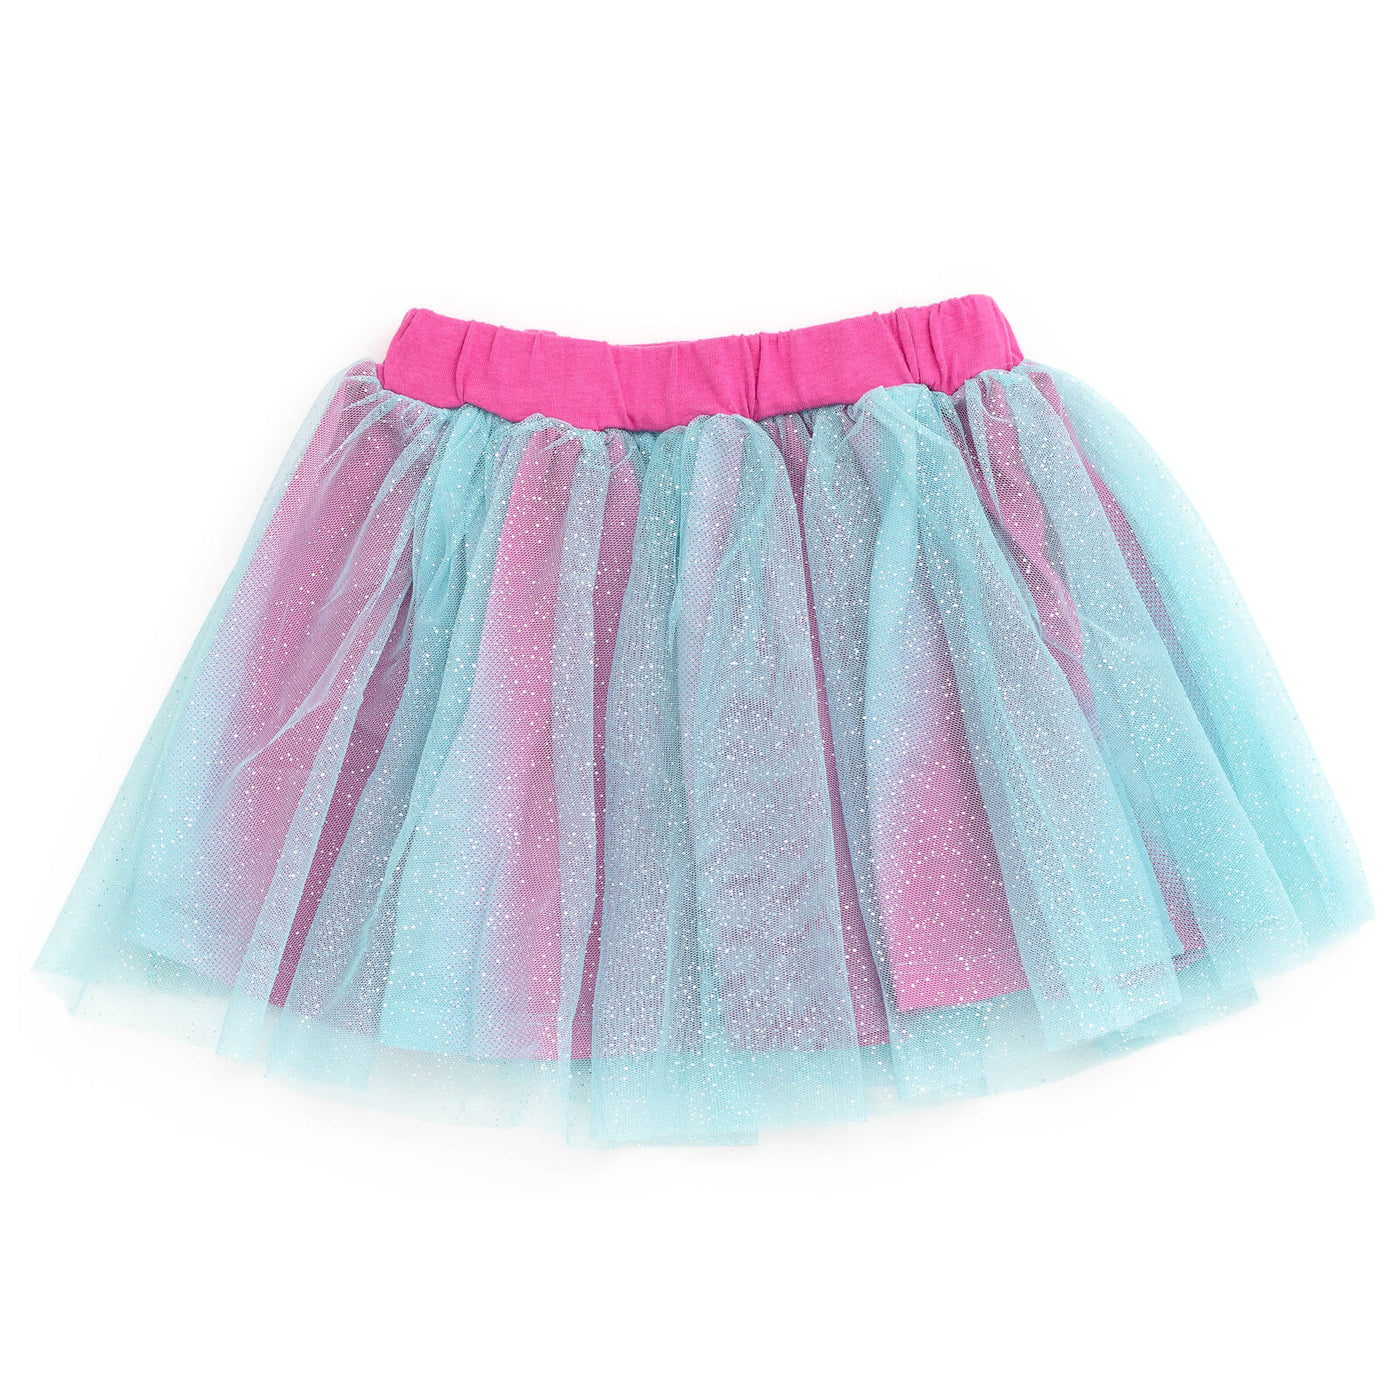 Sesame Street Abby Cadabby T-Shirt Tulle Mesh Skirt and Scrunchie 3 Piece Outfit Set